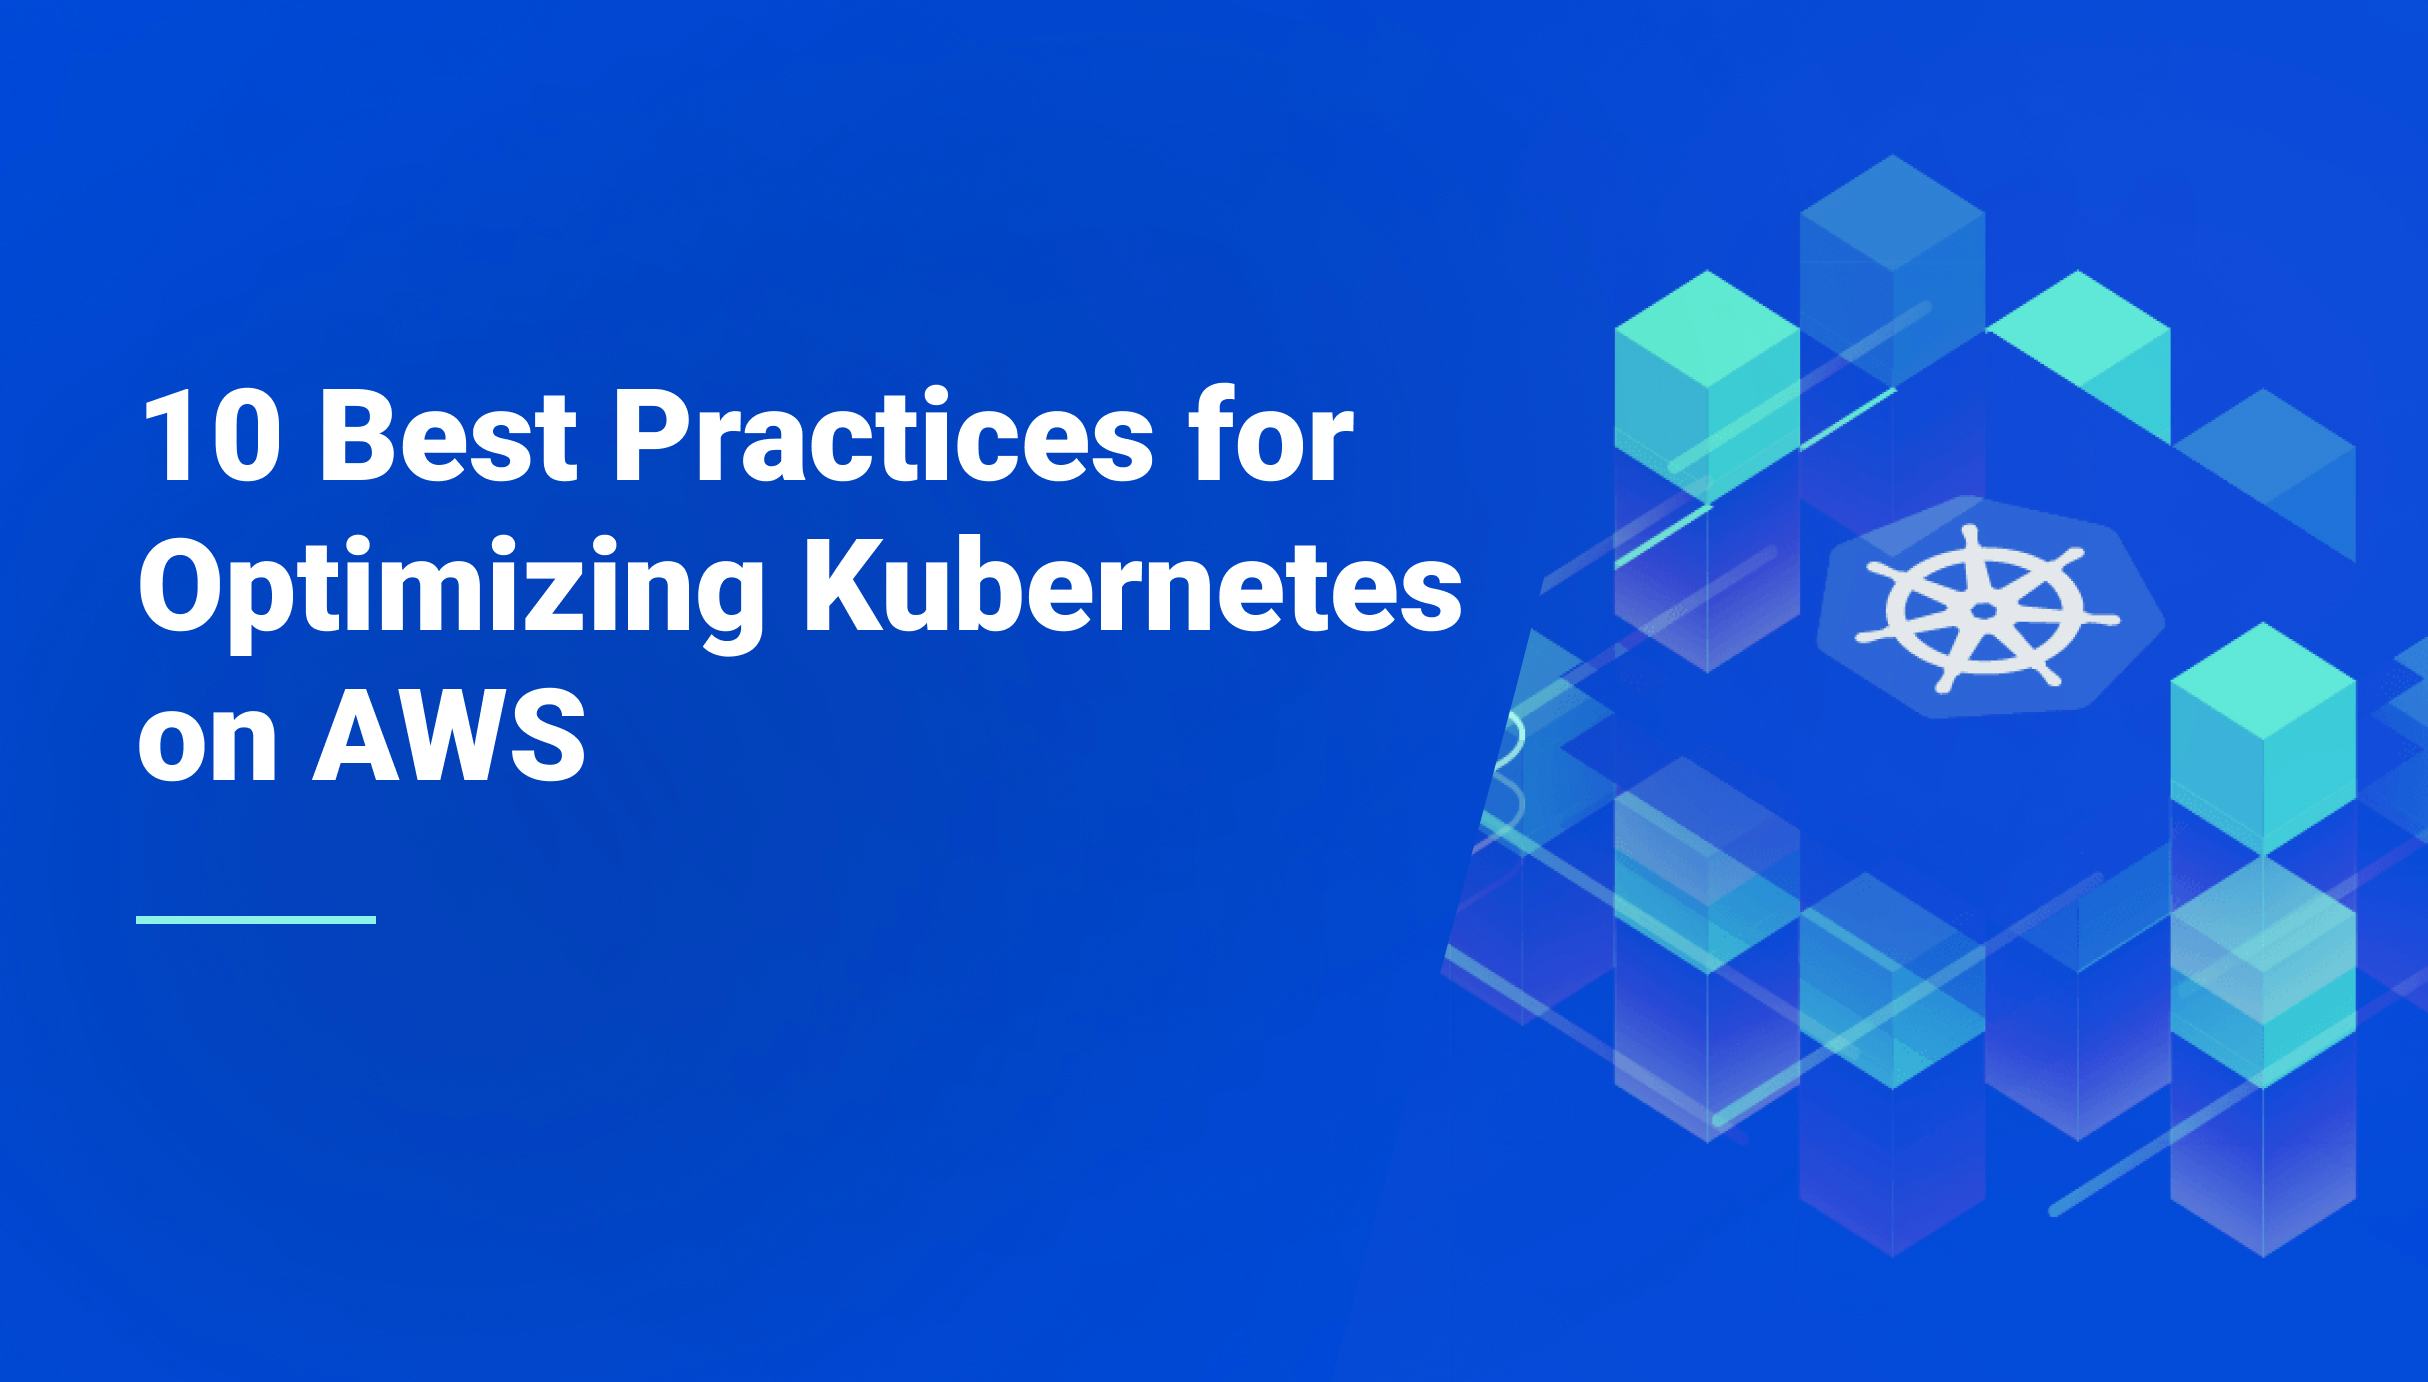 10 Best Practices for Optimizing Kubernetes on AWS